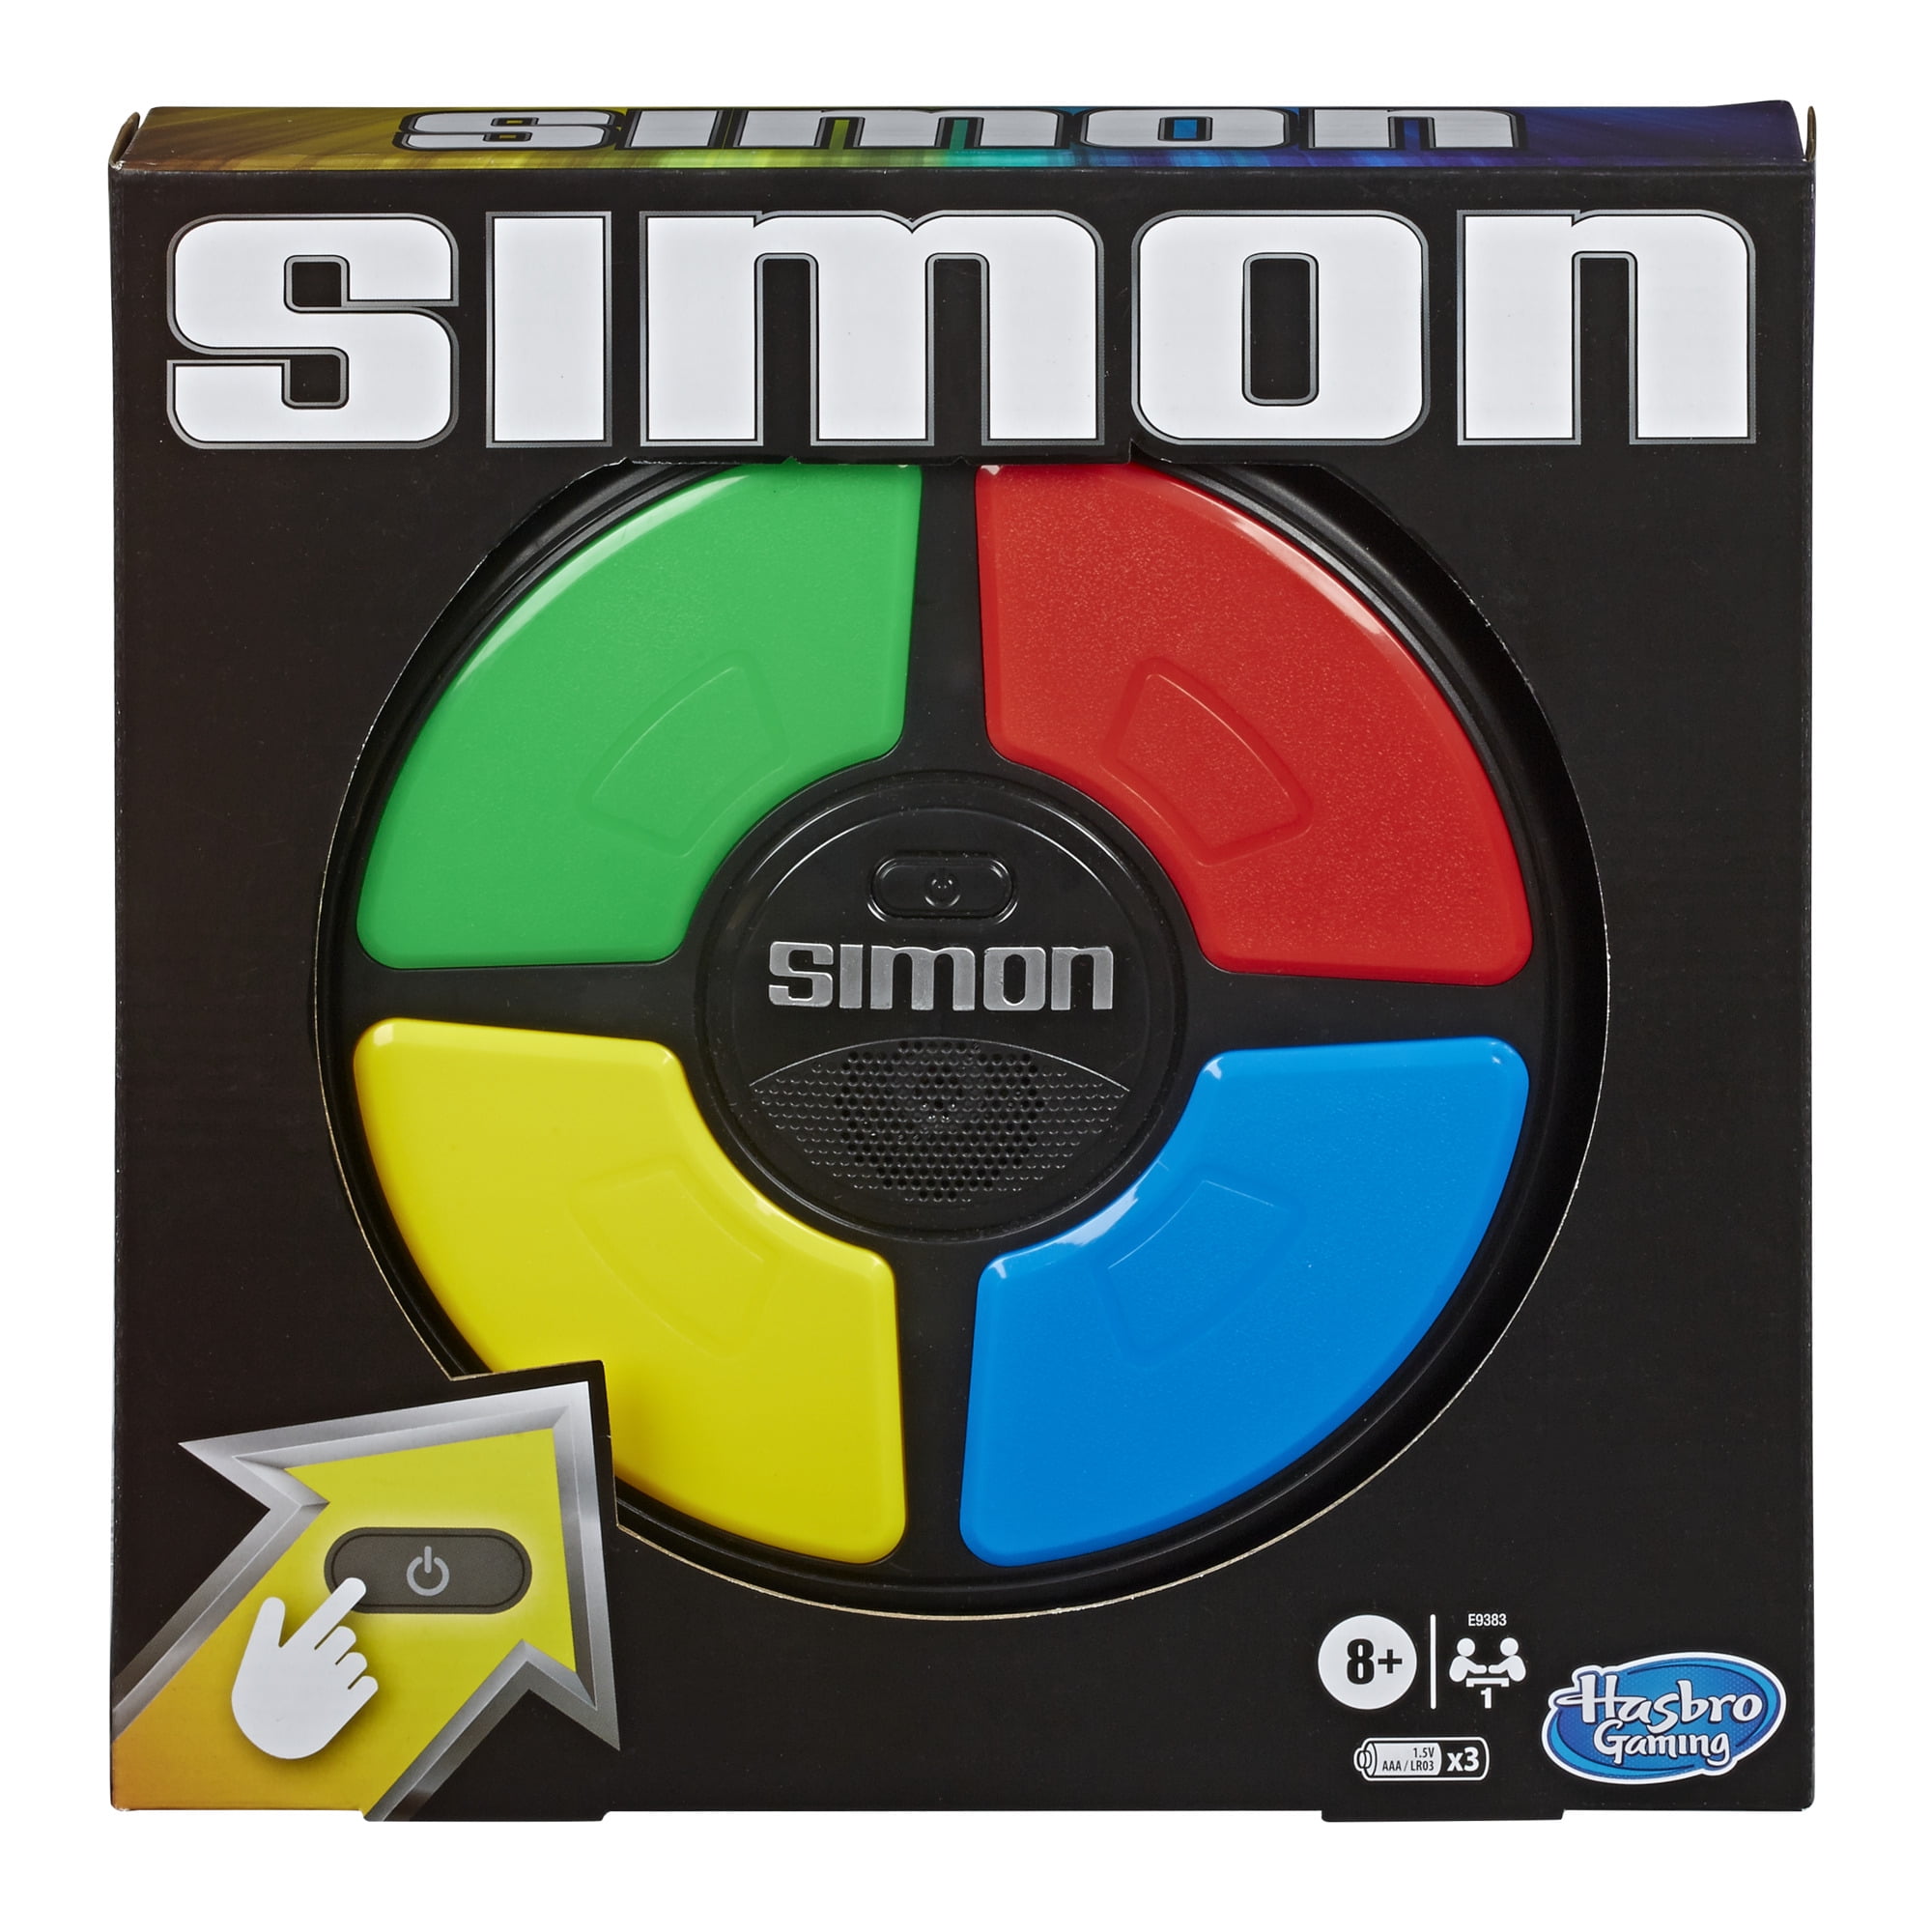 Simon Game; Electronic Memory Game for Kids Ages 8 and Up; Handheld Game with Li